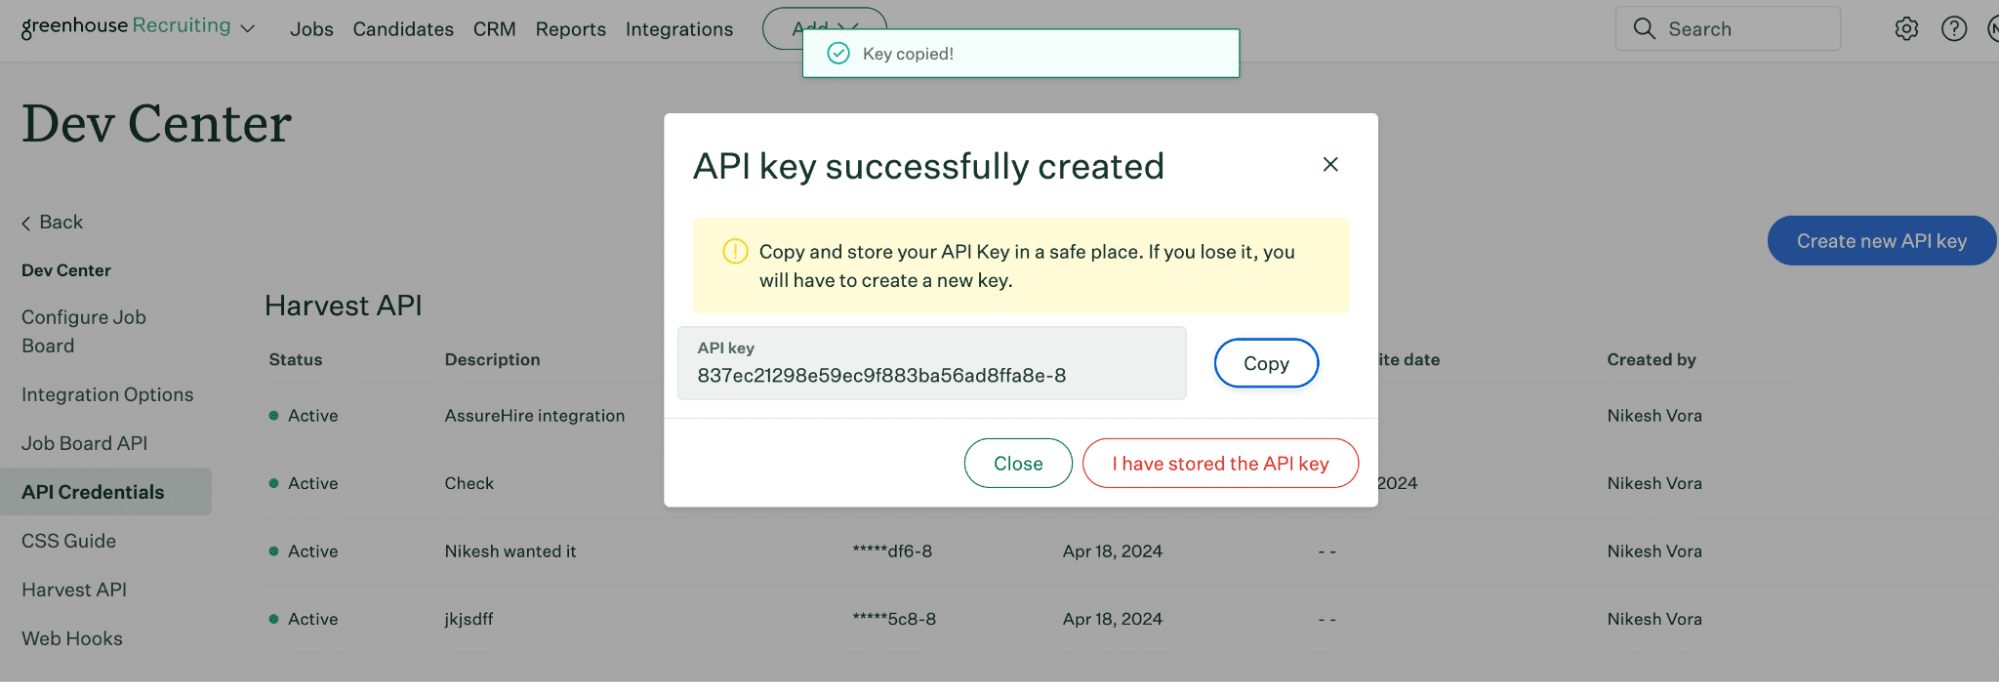 Saving updated permissions and finalizing API key creation in Greenhouse via Google Sheets.